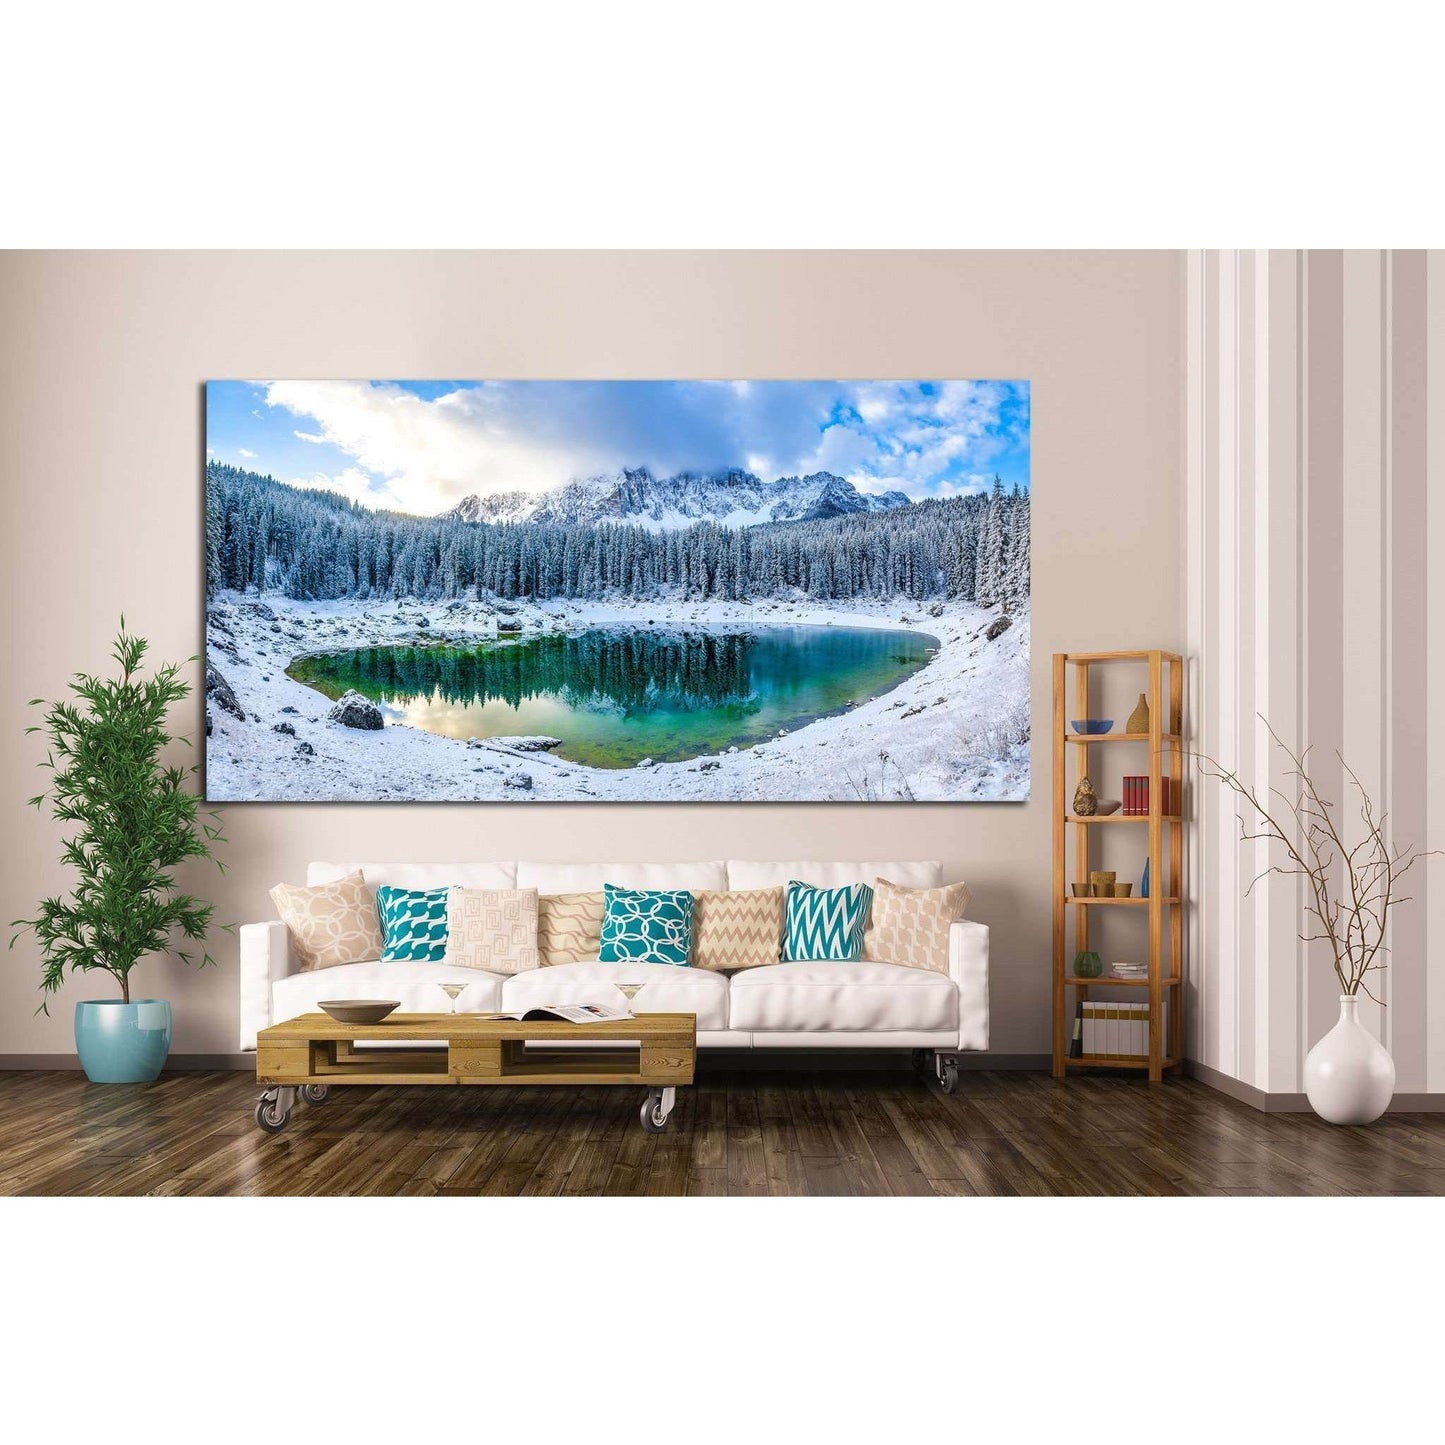 Snowy Mountain and Green Lake Multi-Panel Canvas for Modern DecorThis multi-panel canvas print presents a breathtaking snowy mountain landscape with a crystal-clear lake. The stark white snow contrasts with the vibrant green of the lake, bringing a touch